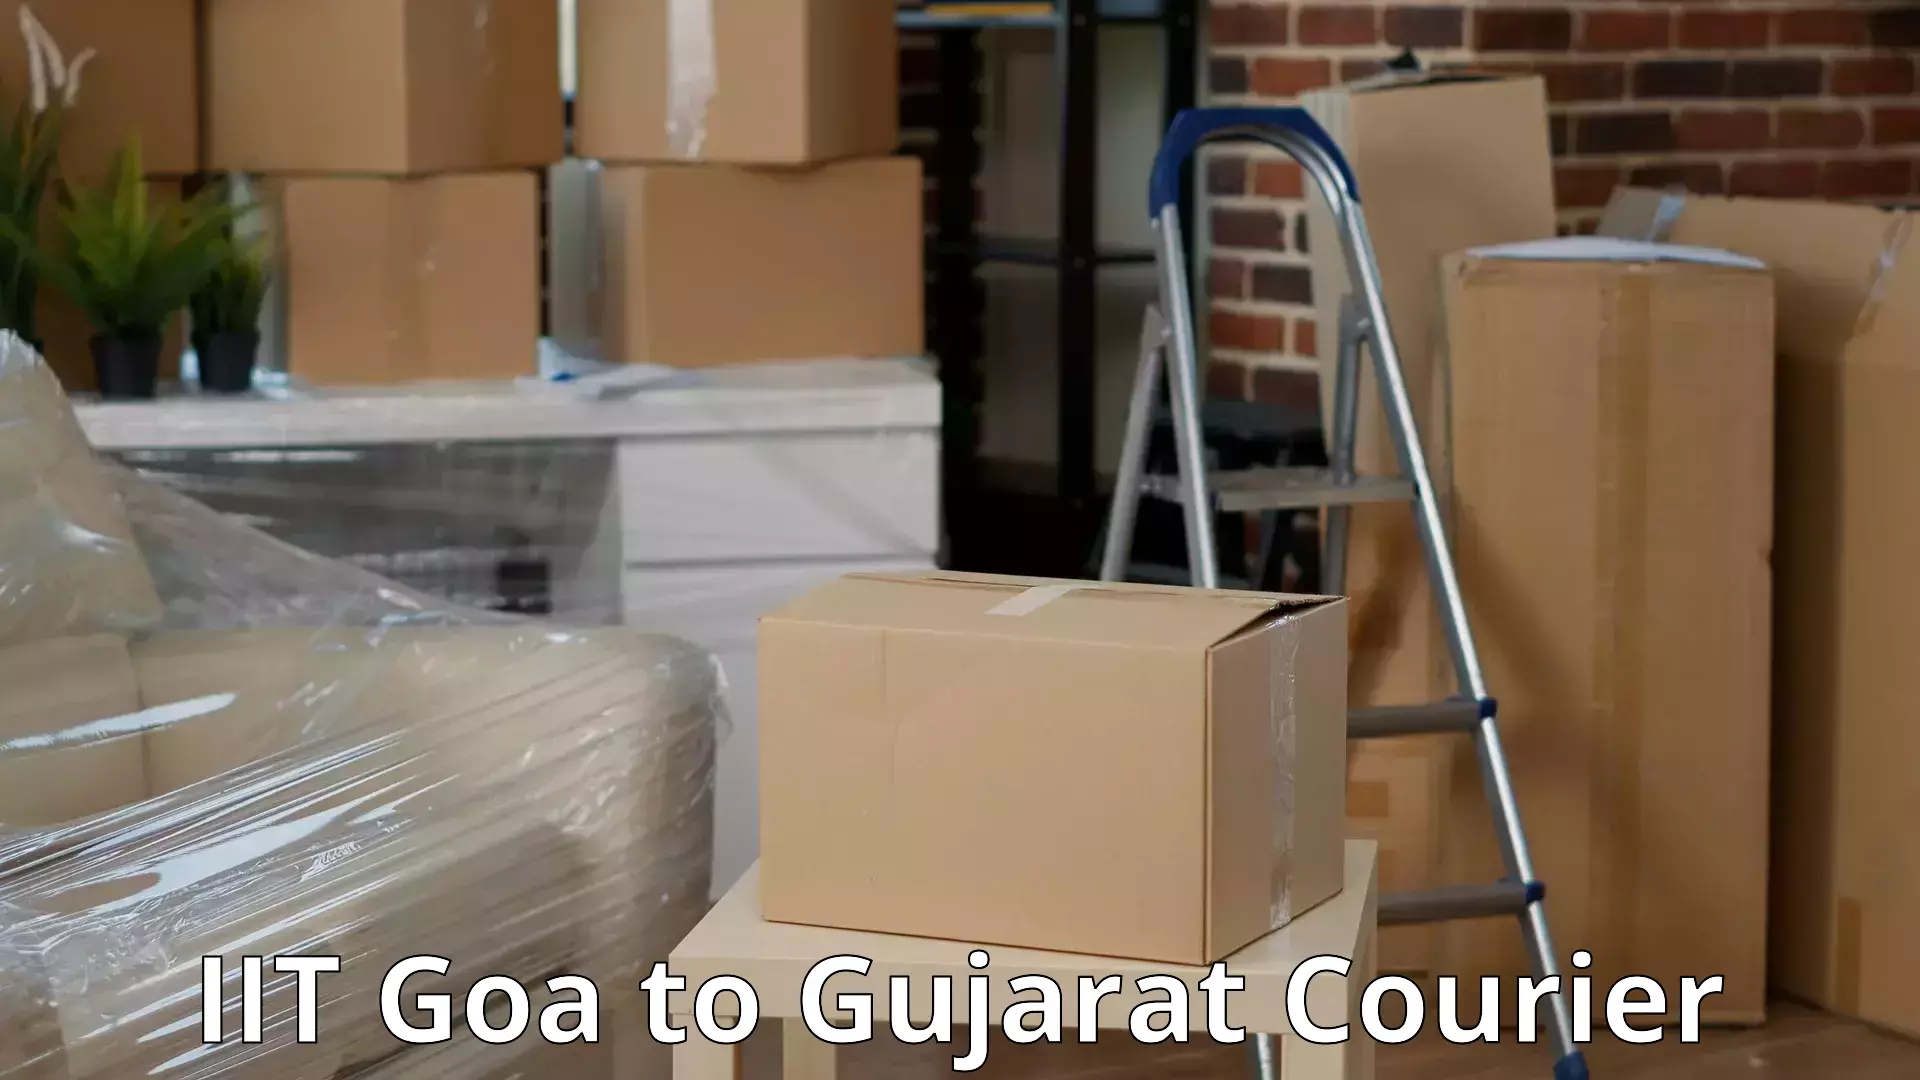 Hassle-free relocation IIT Goa to Gondal